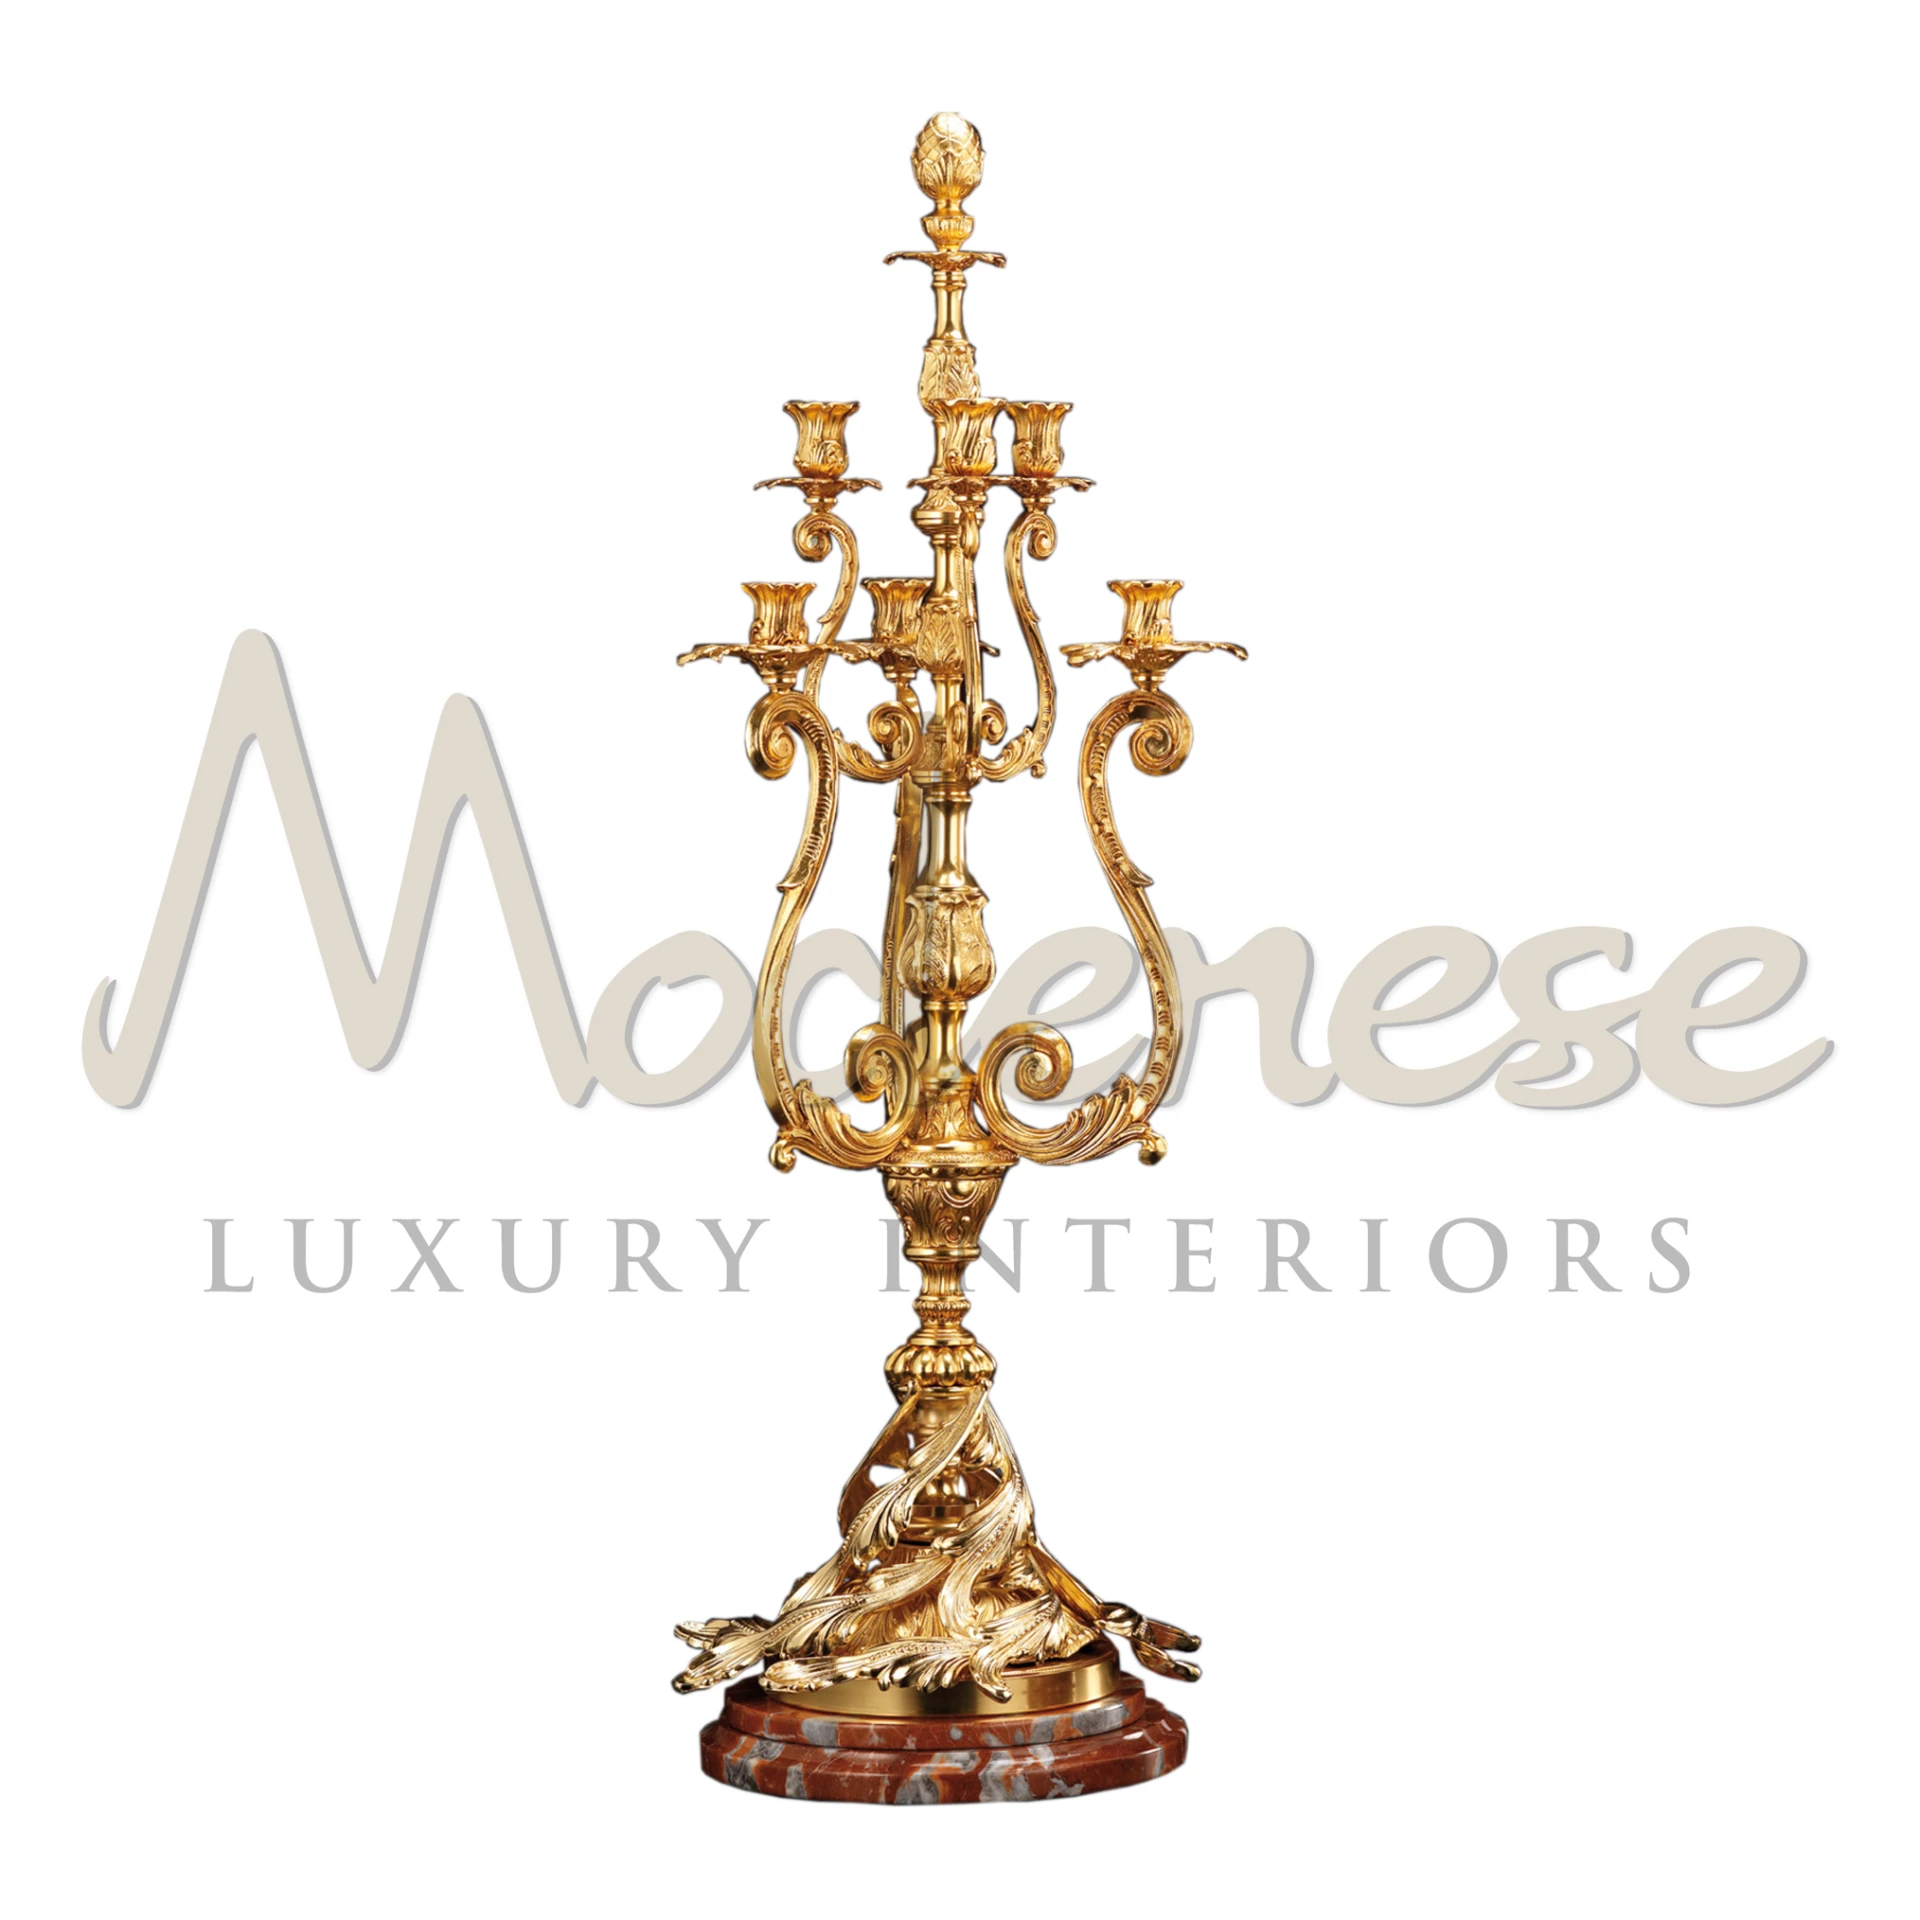 Venetian Candelabra with Gold Leaf Finishing and Rosso Francia Marble Base
